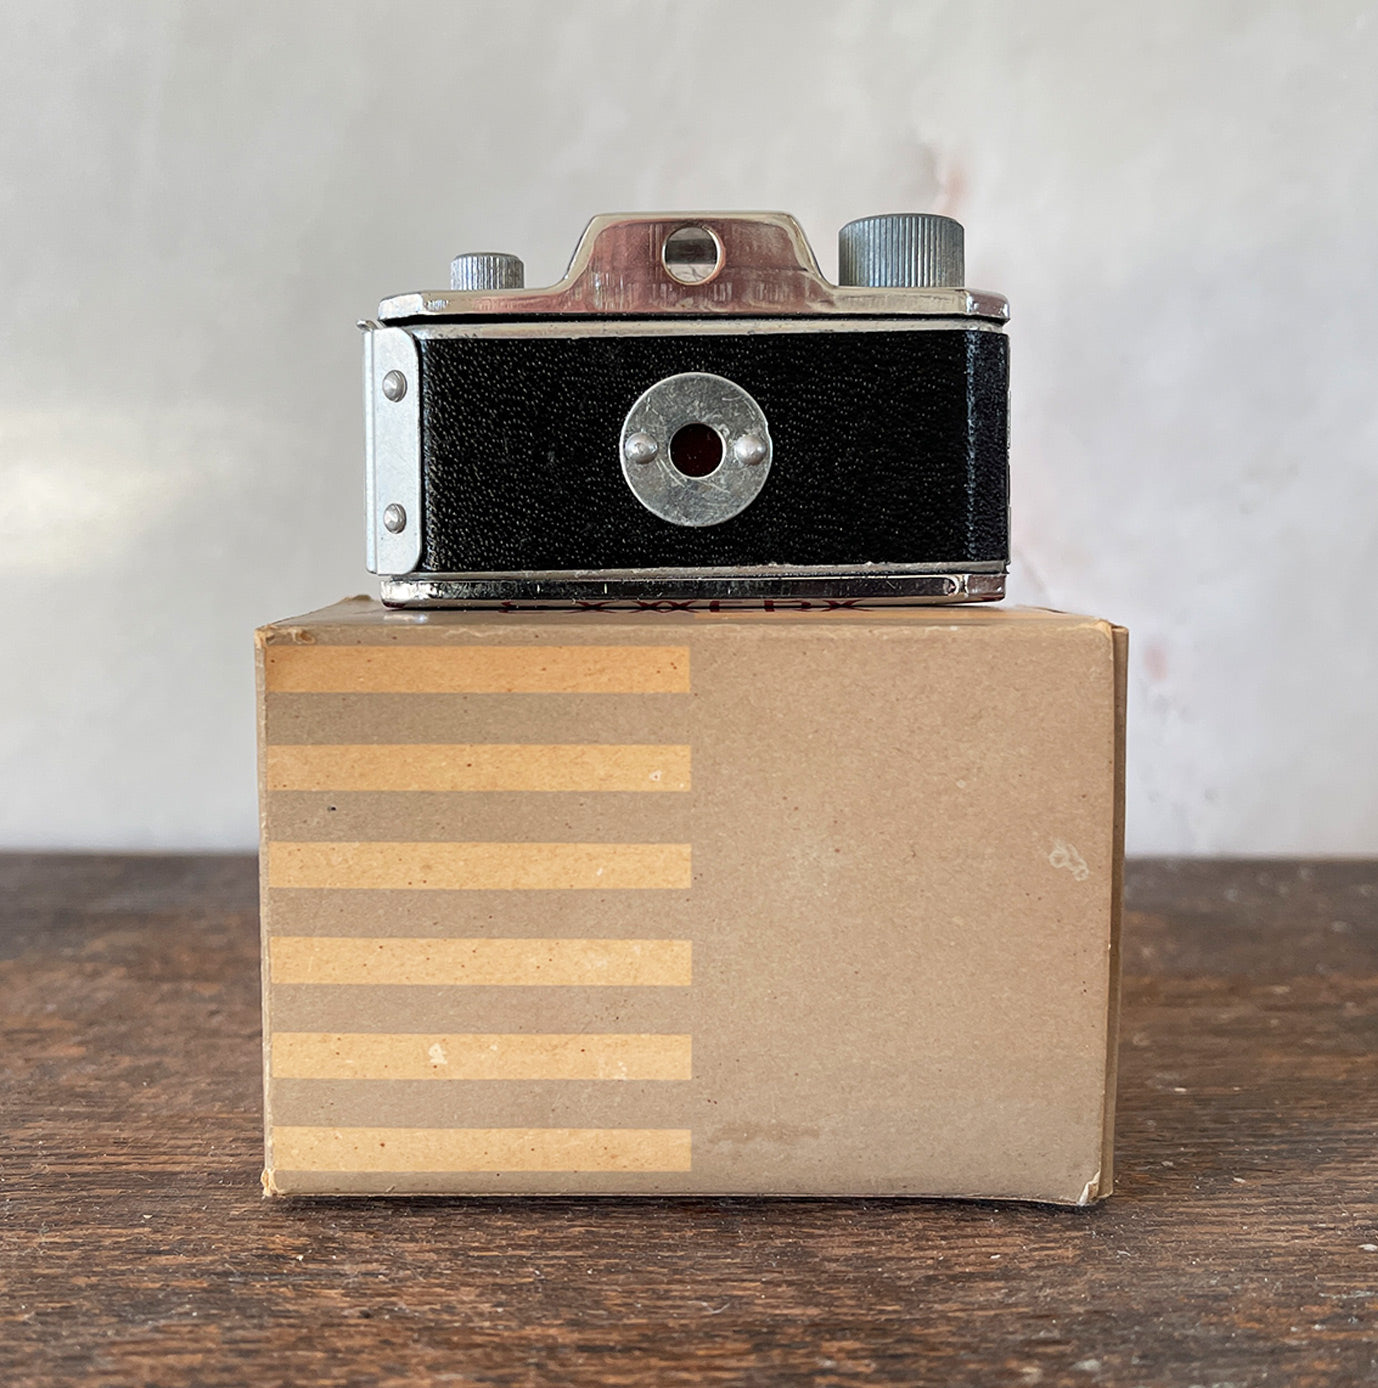 A rare Tougodo Baby Max Miniature 17.5mm Camera in its original box with instruction sheet. The Baby Max is a Japanese sub-miniature camera that takes ten 14x14mm images on 17.5mm paper backed roll film - SHOP NOW - www.intovintage.co.uk